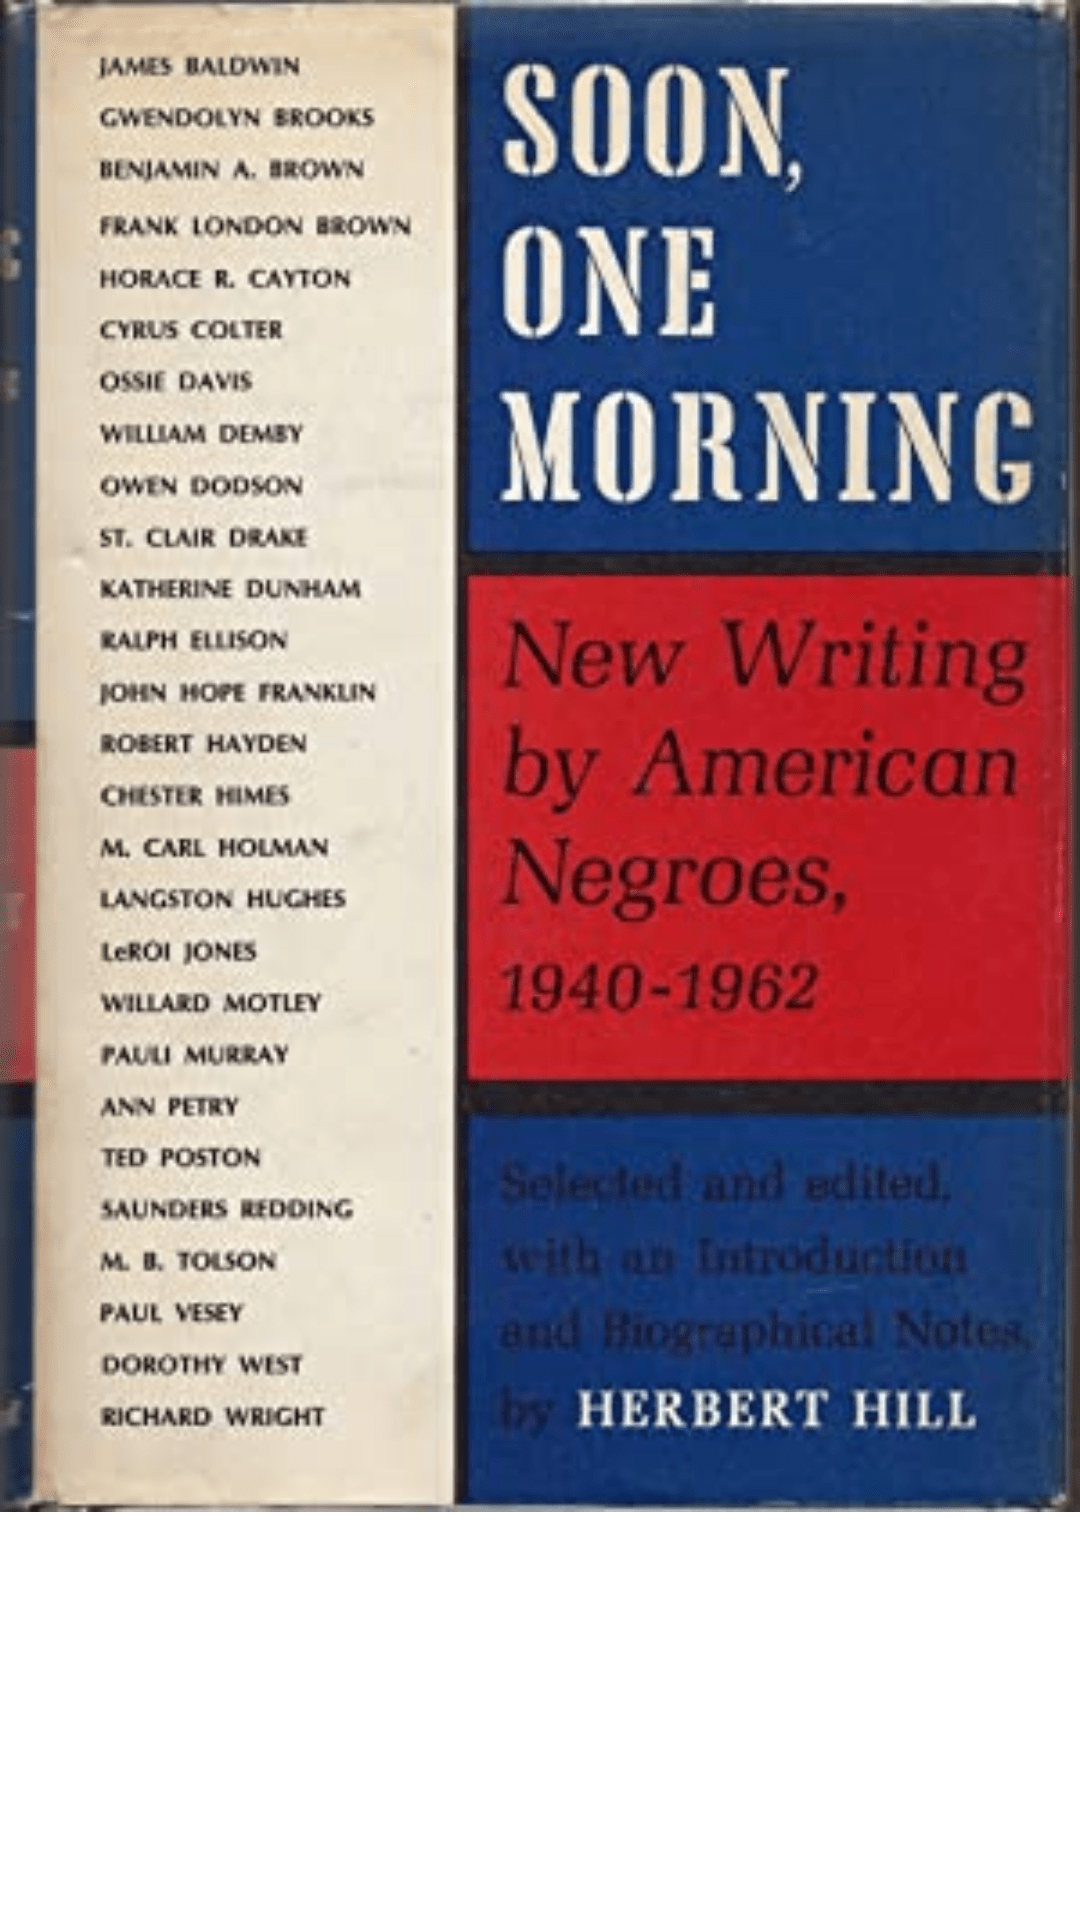 Soon, One Morning: New Writing by American Negroes, 1940-1962